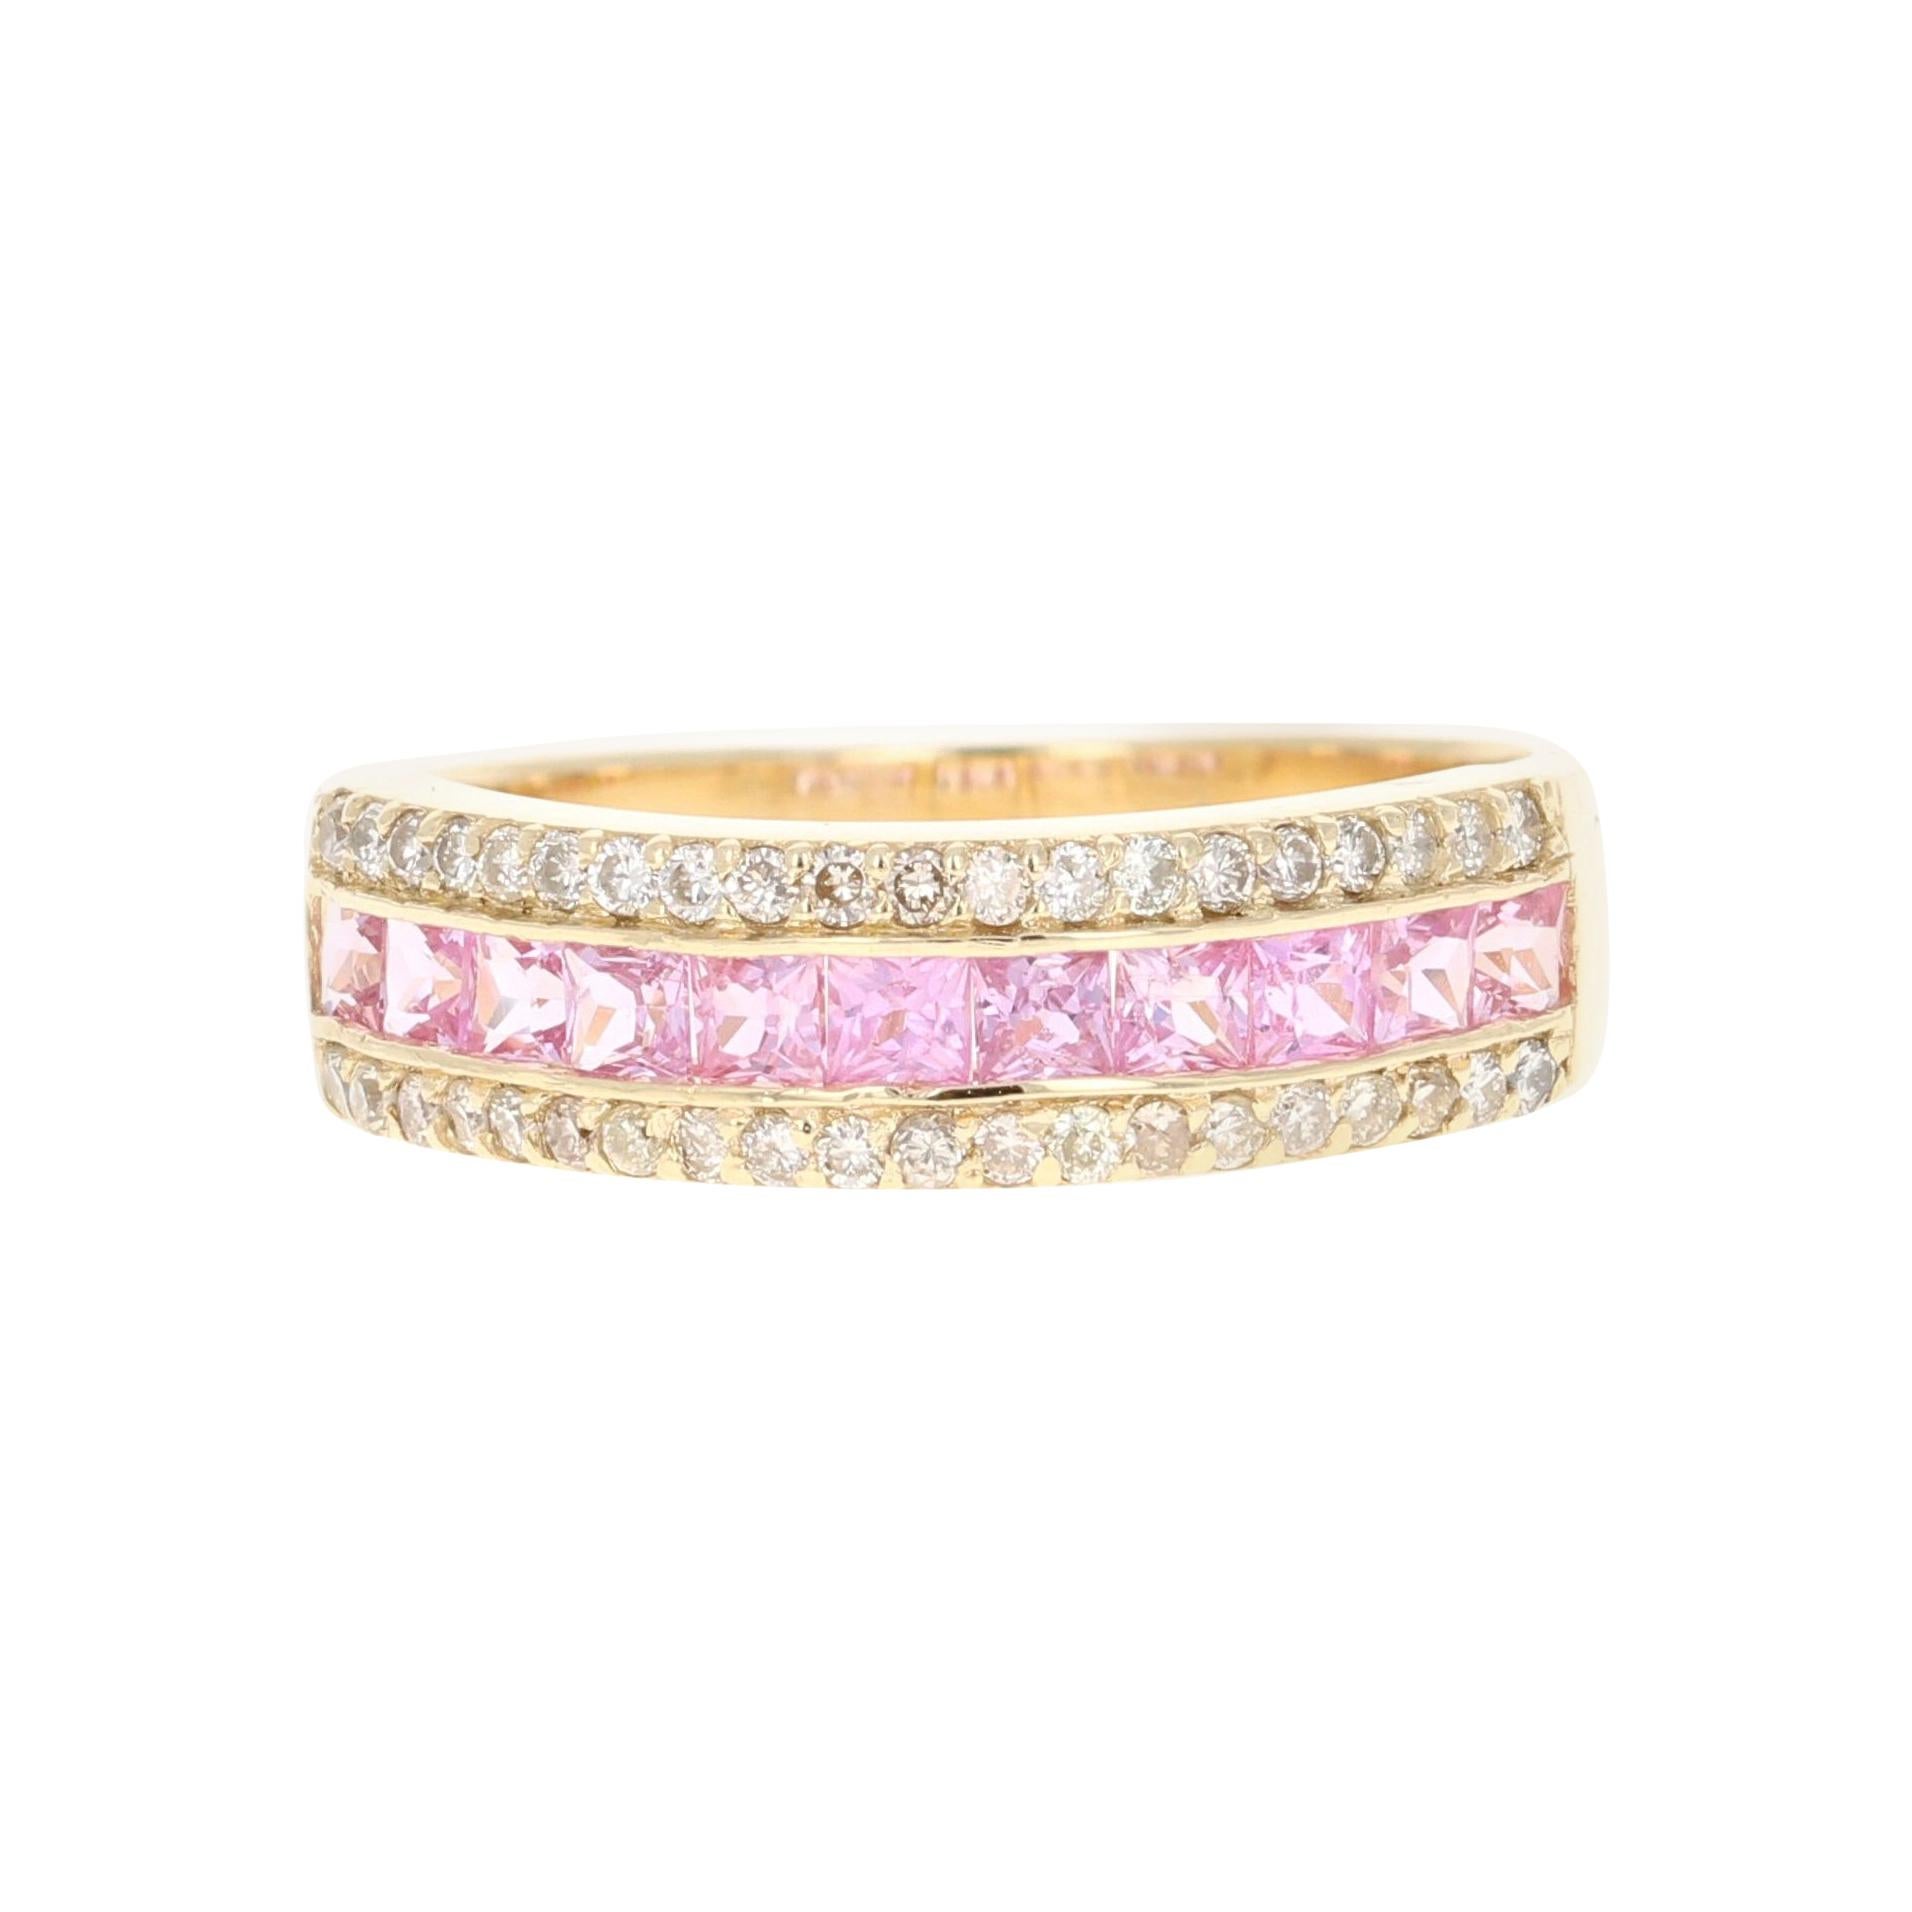 1.17 Carat Pink Sapphire Diamond Yellow Gold Band For Sale